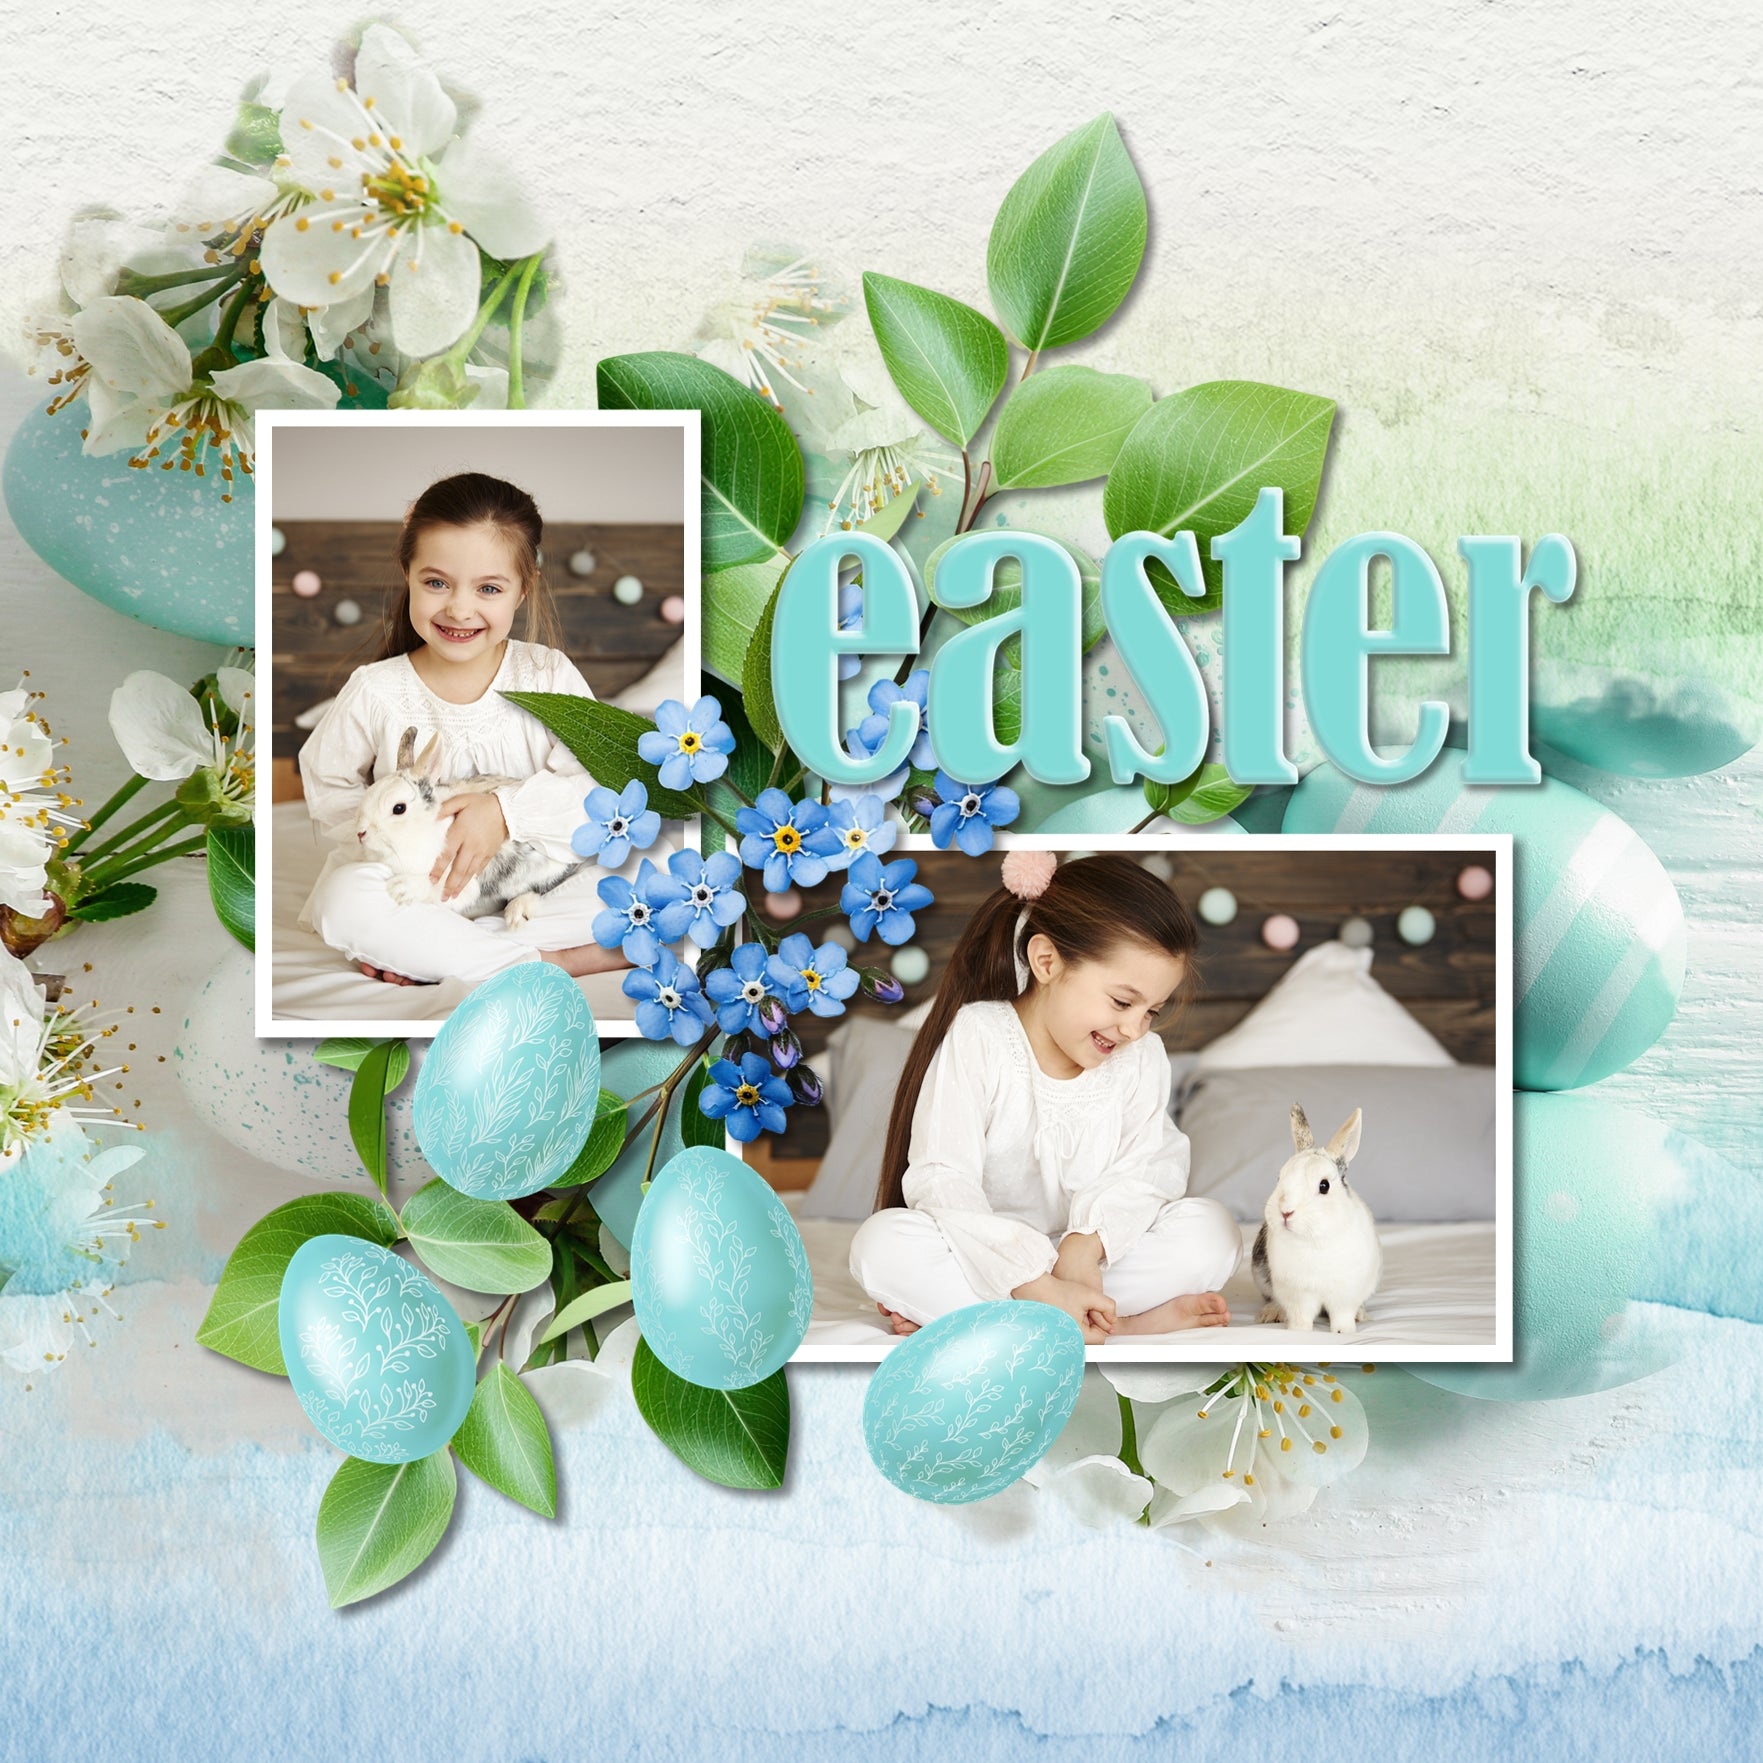 These fun and bright realistic digital scrapbooking embellishments and watercolor papers by Lucky Girl Creative digital art are perfect for all your Easter, spring, and flower garden pages. Imagine the cute Easter Egg Hunt and Easter Bunny pages you could make!